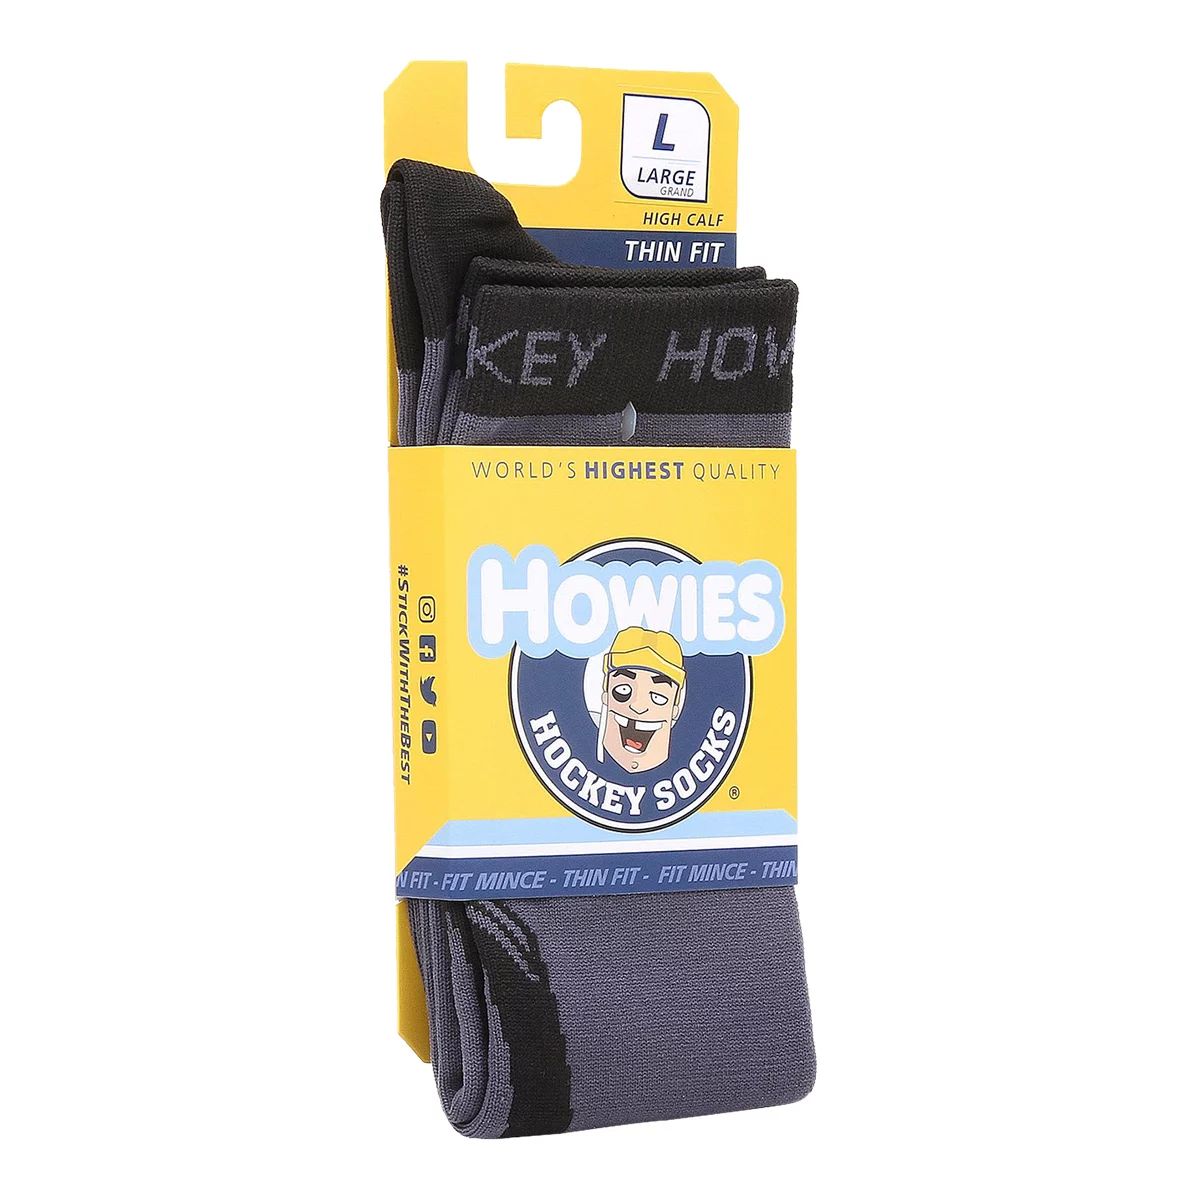 Howies Men's Thin Fit Hockey Socks, Stretchy, Moisture-Wicking